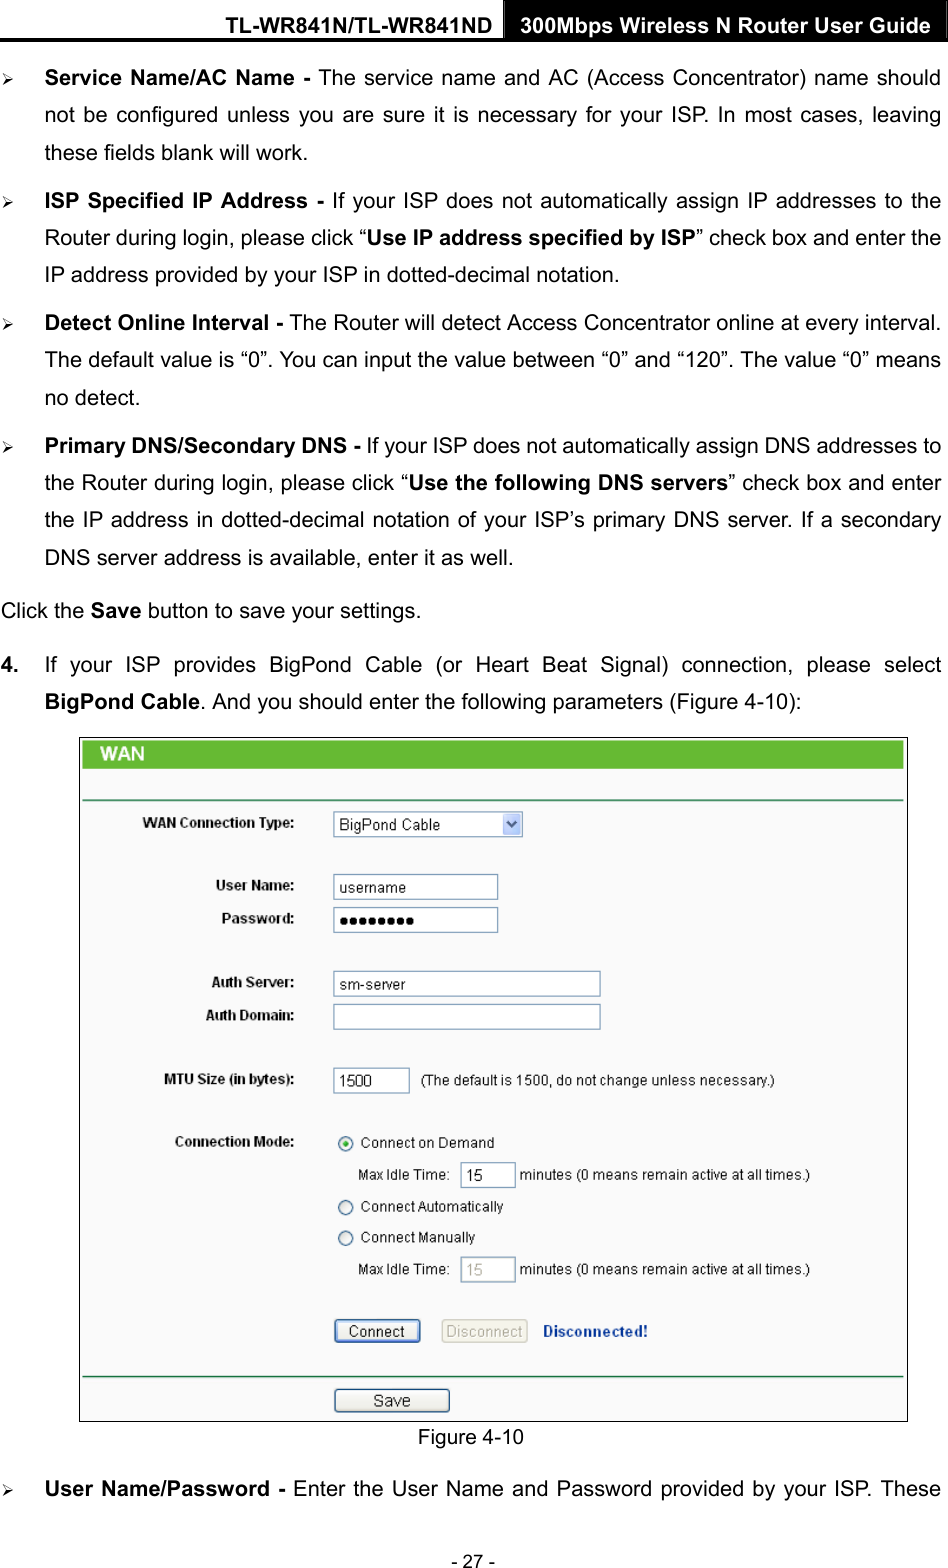 TL-WR841N/TL-WR841ND 300Mbps Wireless N Router User Guide - 27 - ¾ Service Name/AC Name - The service name and AC (Access Concentrator) name should not be configured unless you are sure it is necessary for your ISP. In most cases, leaving these fields blank will work. ¾ ISP Specified IP Address - If your ISP does not automatically assign IP addresses to the Router during login, please click “Use IP address specified by ISP” check box and enter the IP address provided by your ISP in dotted-decimal notation. ¾ Detect Online Interval - The Router will detect Access Concentrator online at every interval. The default value is “0”. You can input the value between “0” and “120”. The value “0” means no detect. ¾ Primary DNS/Secondary DNS - If your ISP does not automatically assign DNS addresses to the Router during login, please click “Use the following DNS servers” check box and enter the IP address in dotted-decimal notation of your ISP’s primary DNS server. If a secondary DNS server address is available, enter it as well. Click the Save button to save your settings. 4.  If your ISP provides BigPond Cable (or Heart Beat Signal) connection, please select BigPond Cable. And you should enter the following parameters (Figure 4-10):  Figure 4-10 ¾ User Name/Password - Enter the User Name and Password provided by your ISP. These 